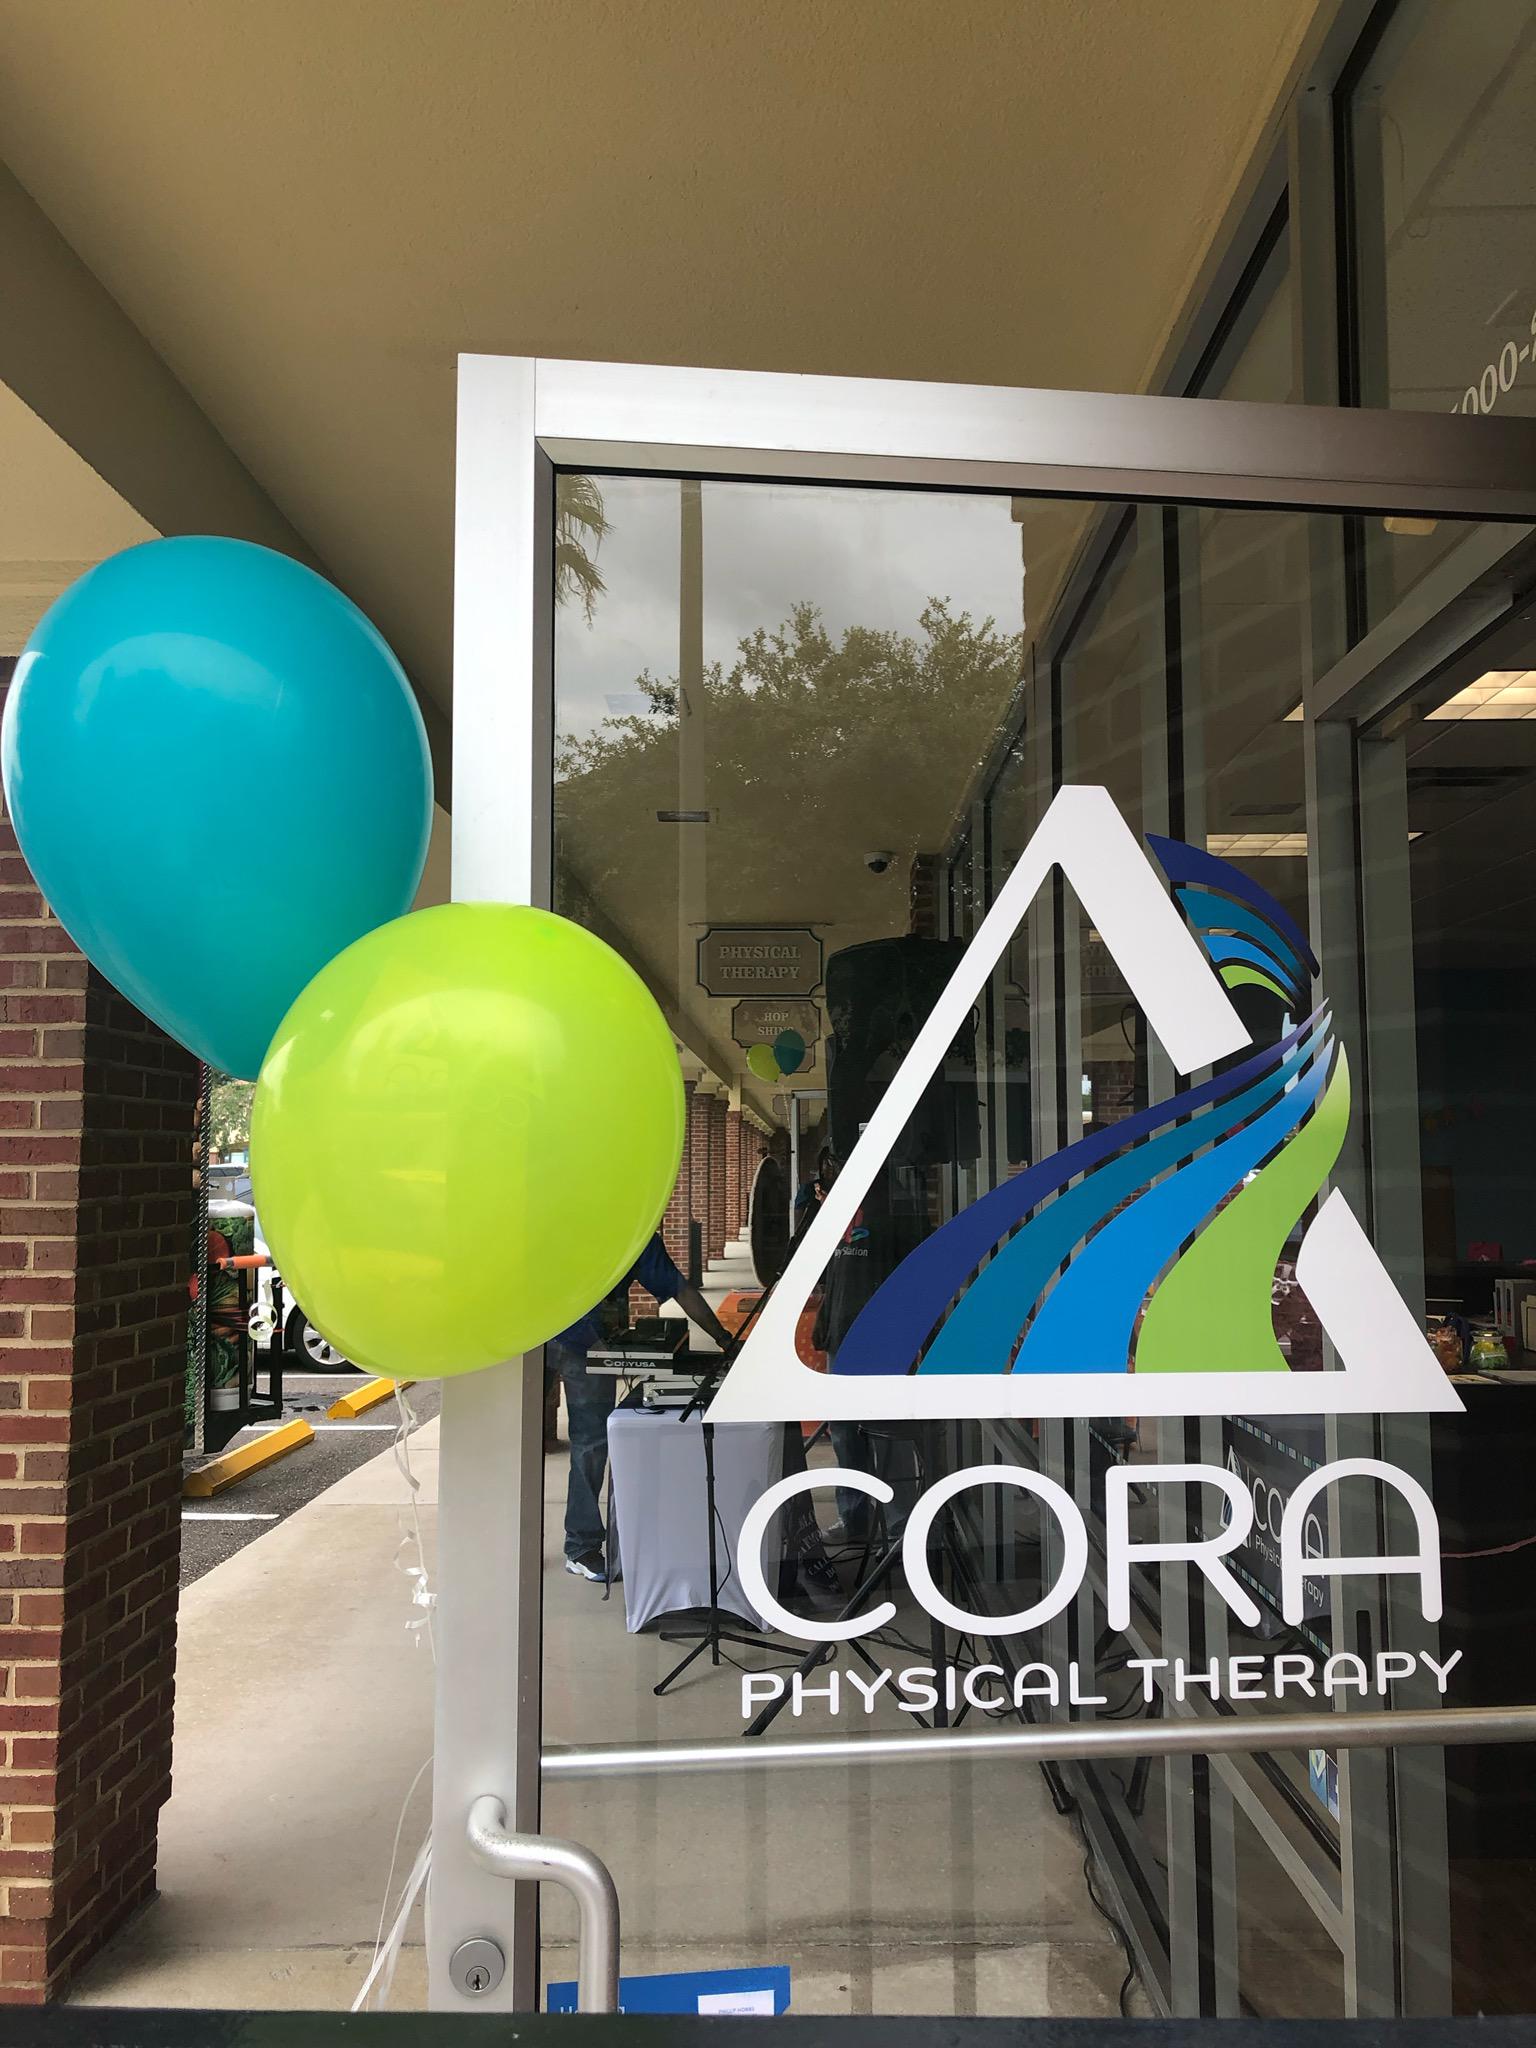 CORA Physical Therapy Fleming Island Photo